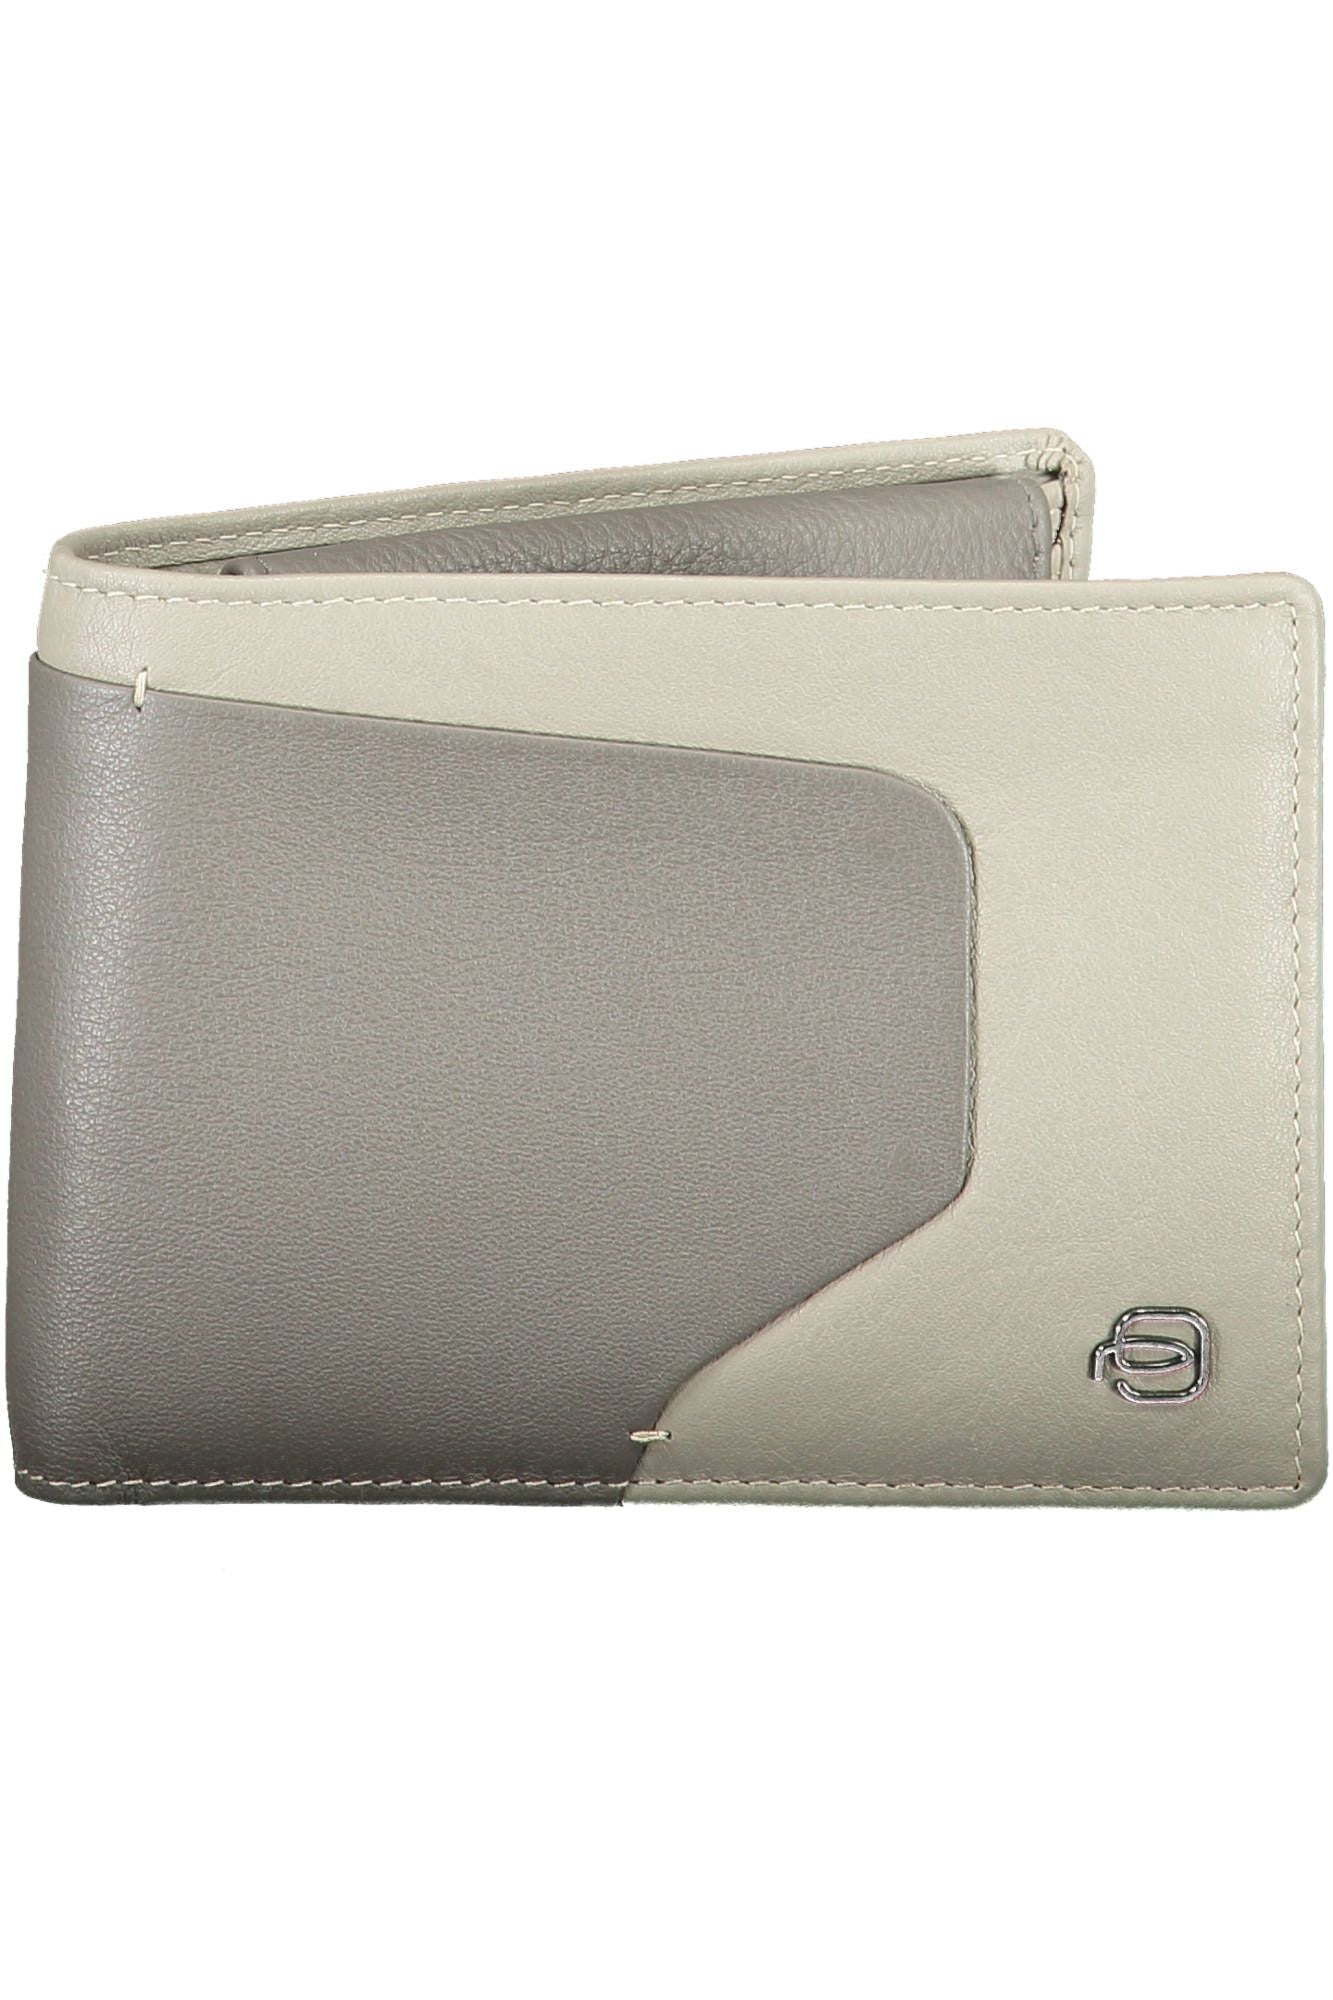 Elegant Gray Leather Wallet with RFID Block